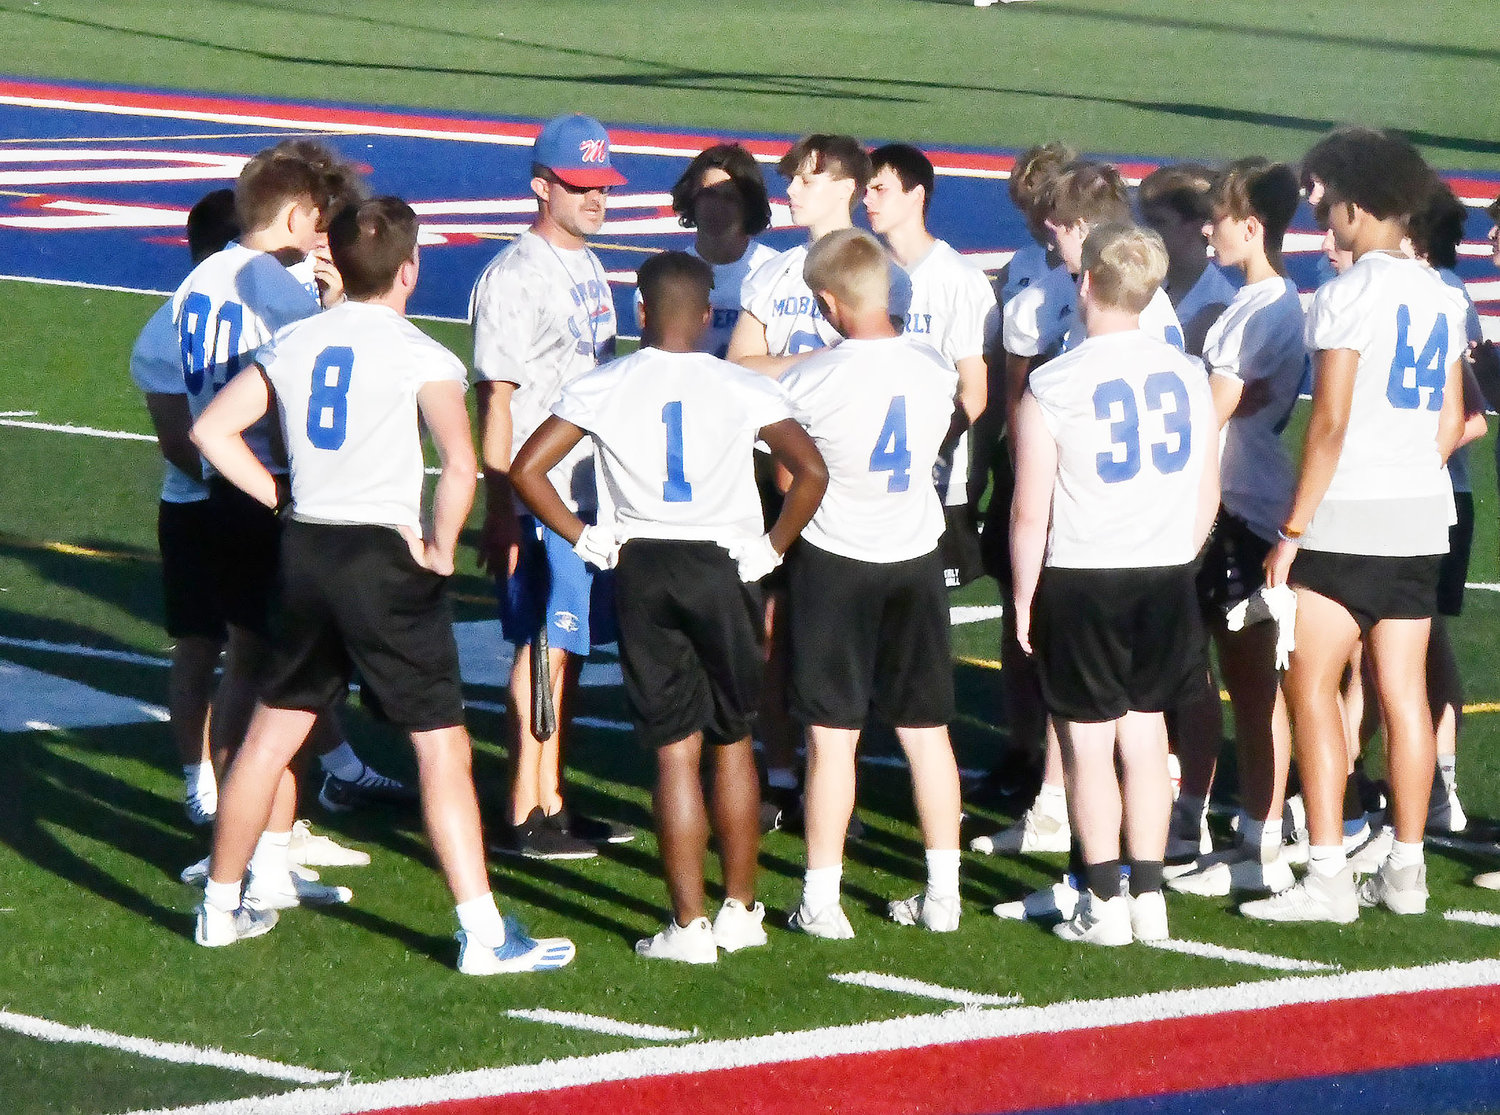 Moberly head football coach Cody McDowell talks to the players following completion of the 7-on-7 session on Wednesday, June 22.